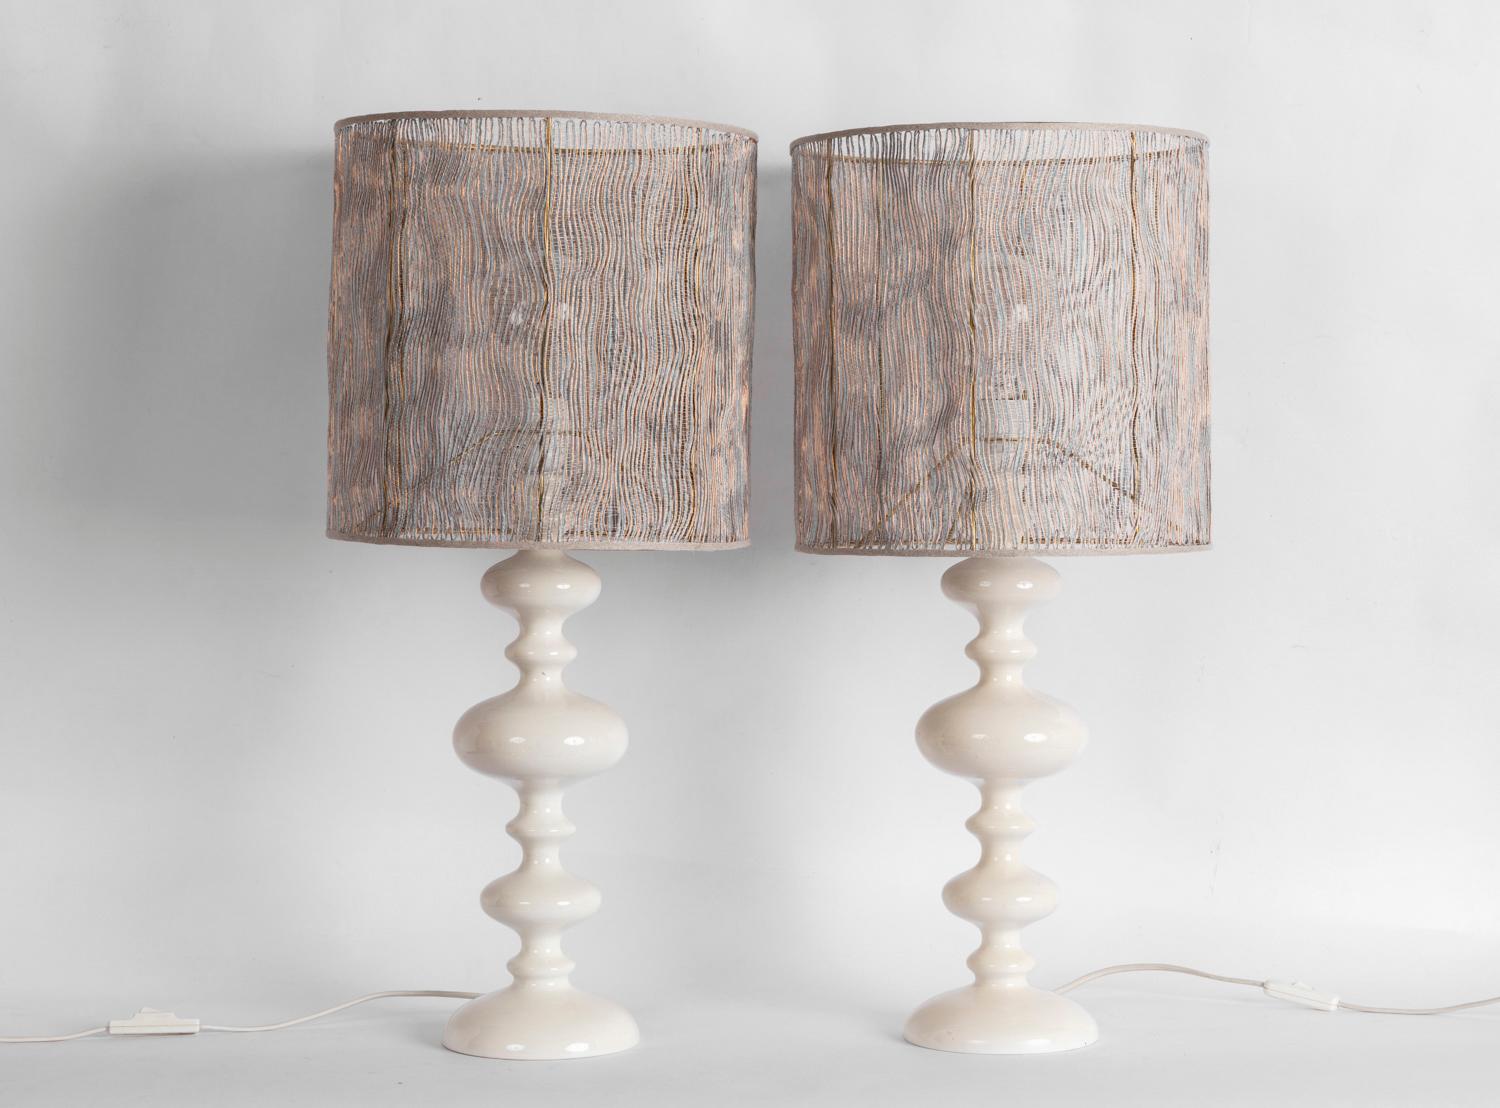 Pair of lamps in turned white lacquered wood with a shaft composed of six flattened different sizes balls, standing on a circular base, slightly bulging.

Cylindrical lampshade with a structure in cotton, linen, copper and nylon, drawing vertical